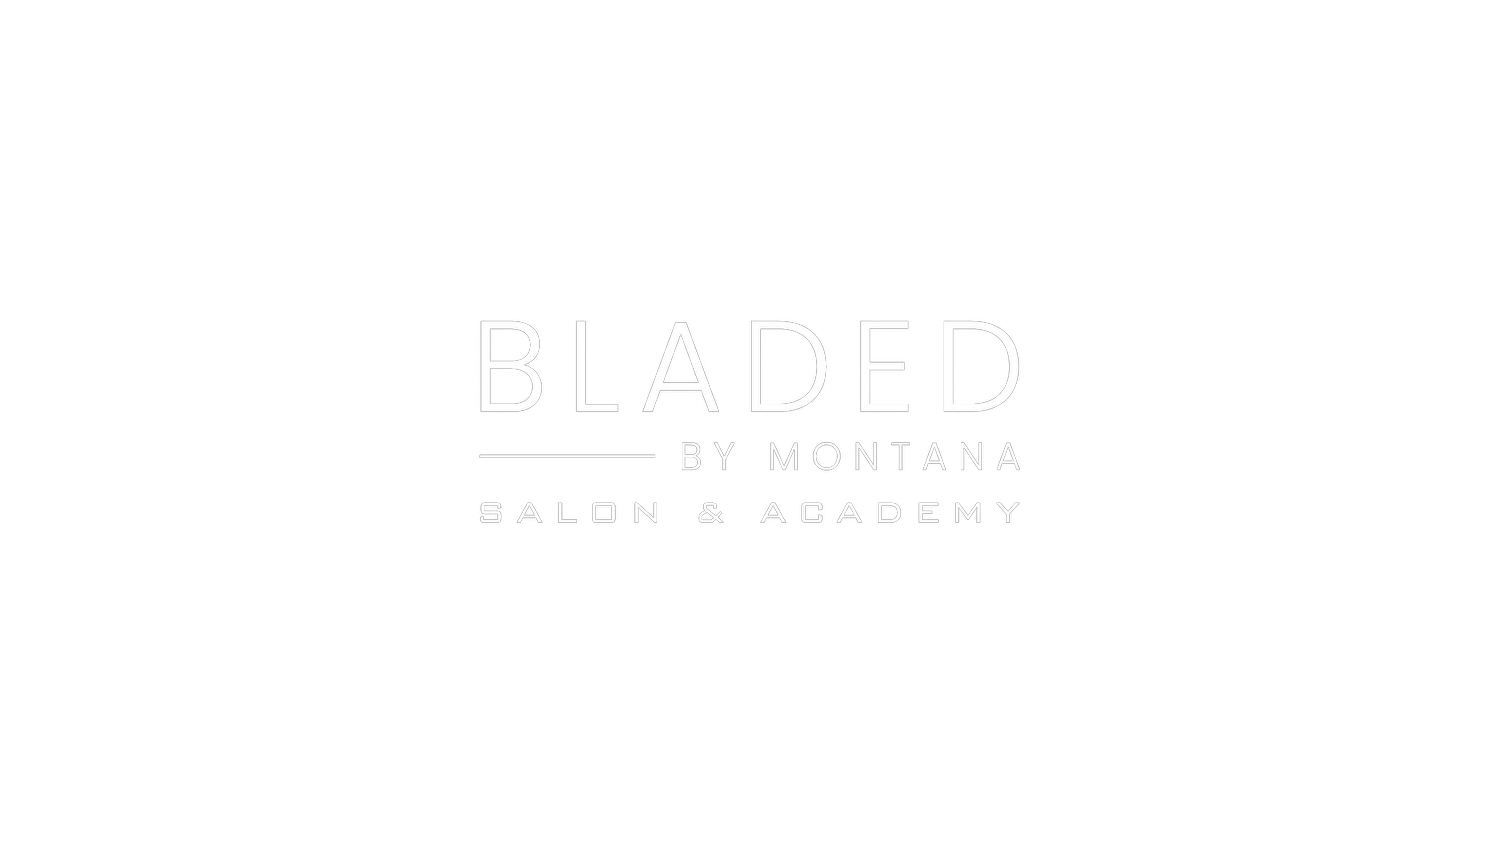 Bladed by Montana